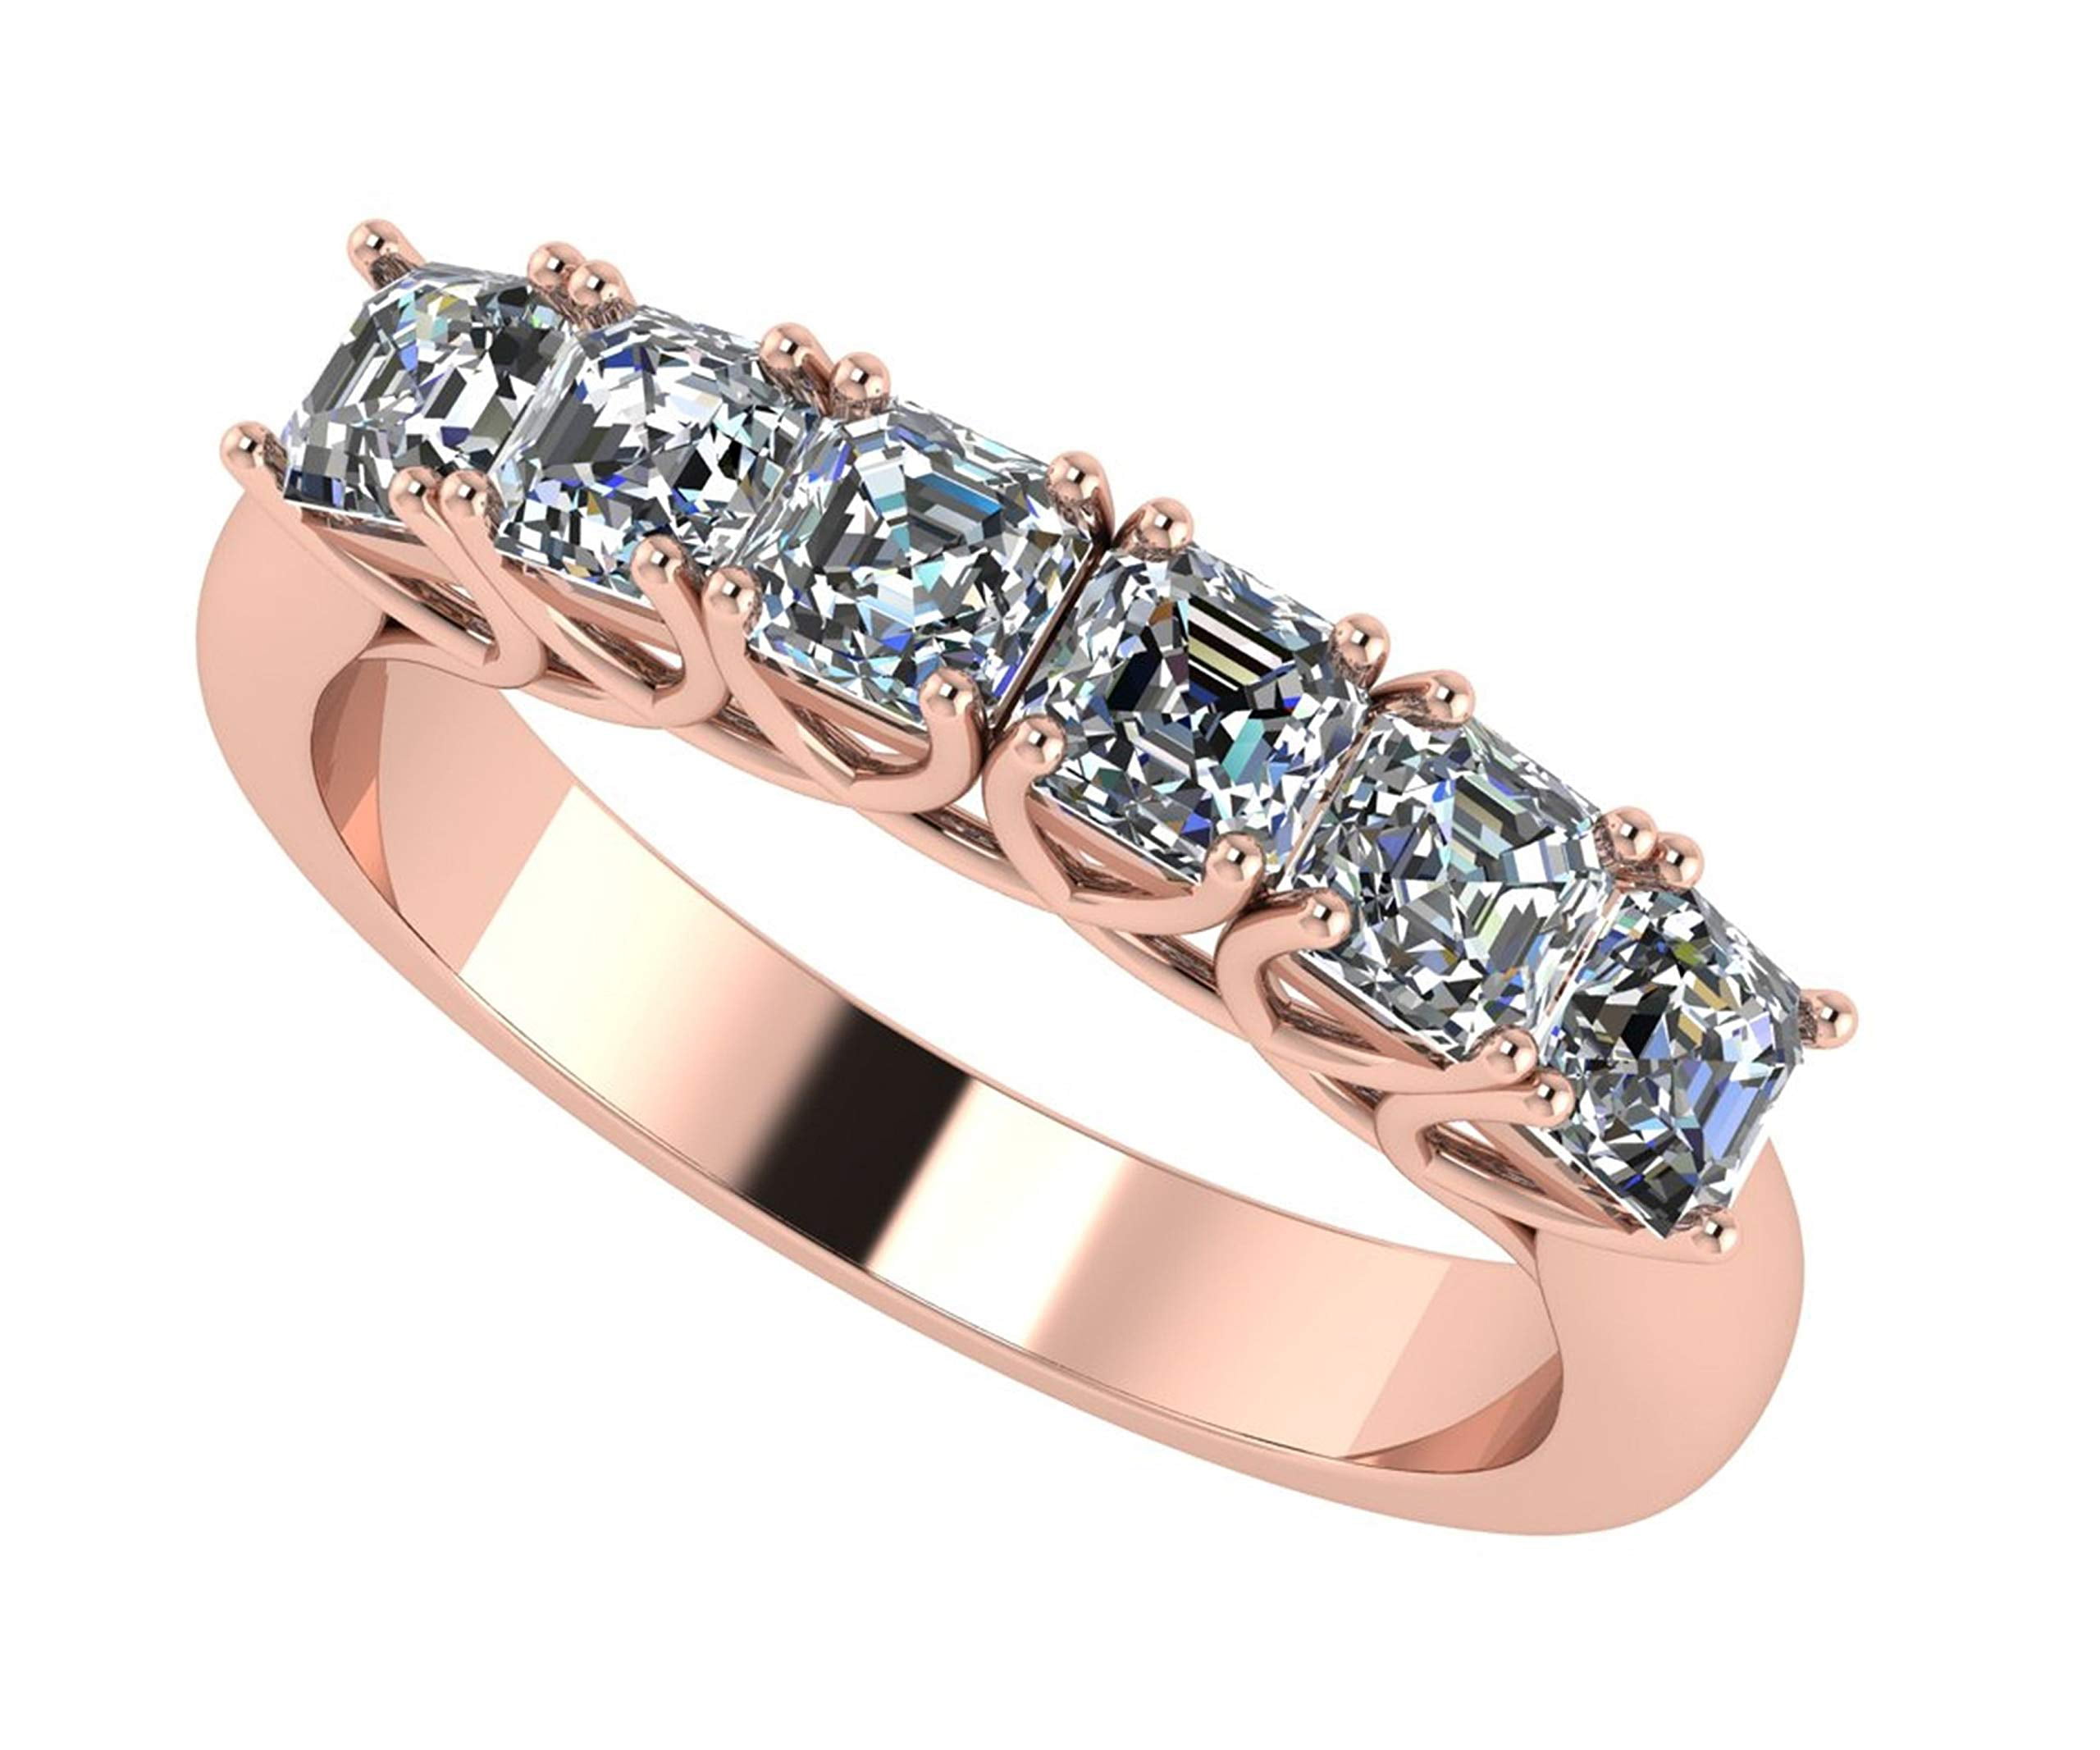 Details about   2.50Ct Pear Cut Morganite Diamond Solitaire Engagement Ring 14K Rose Gold Finish